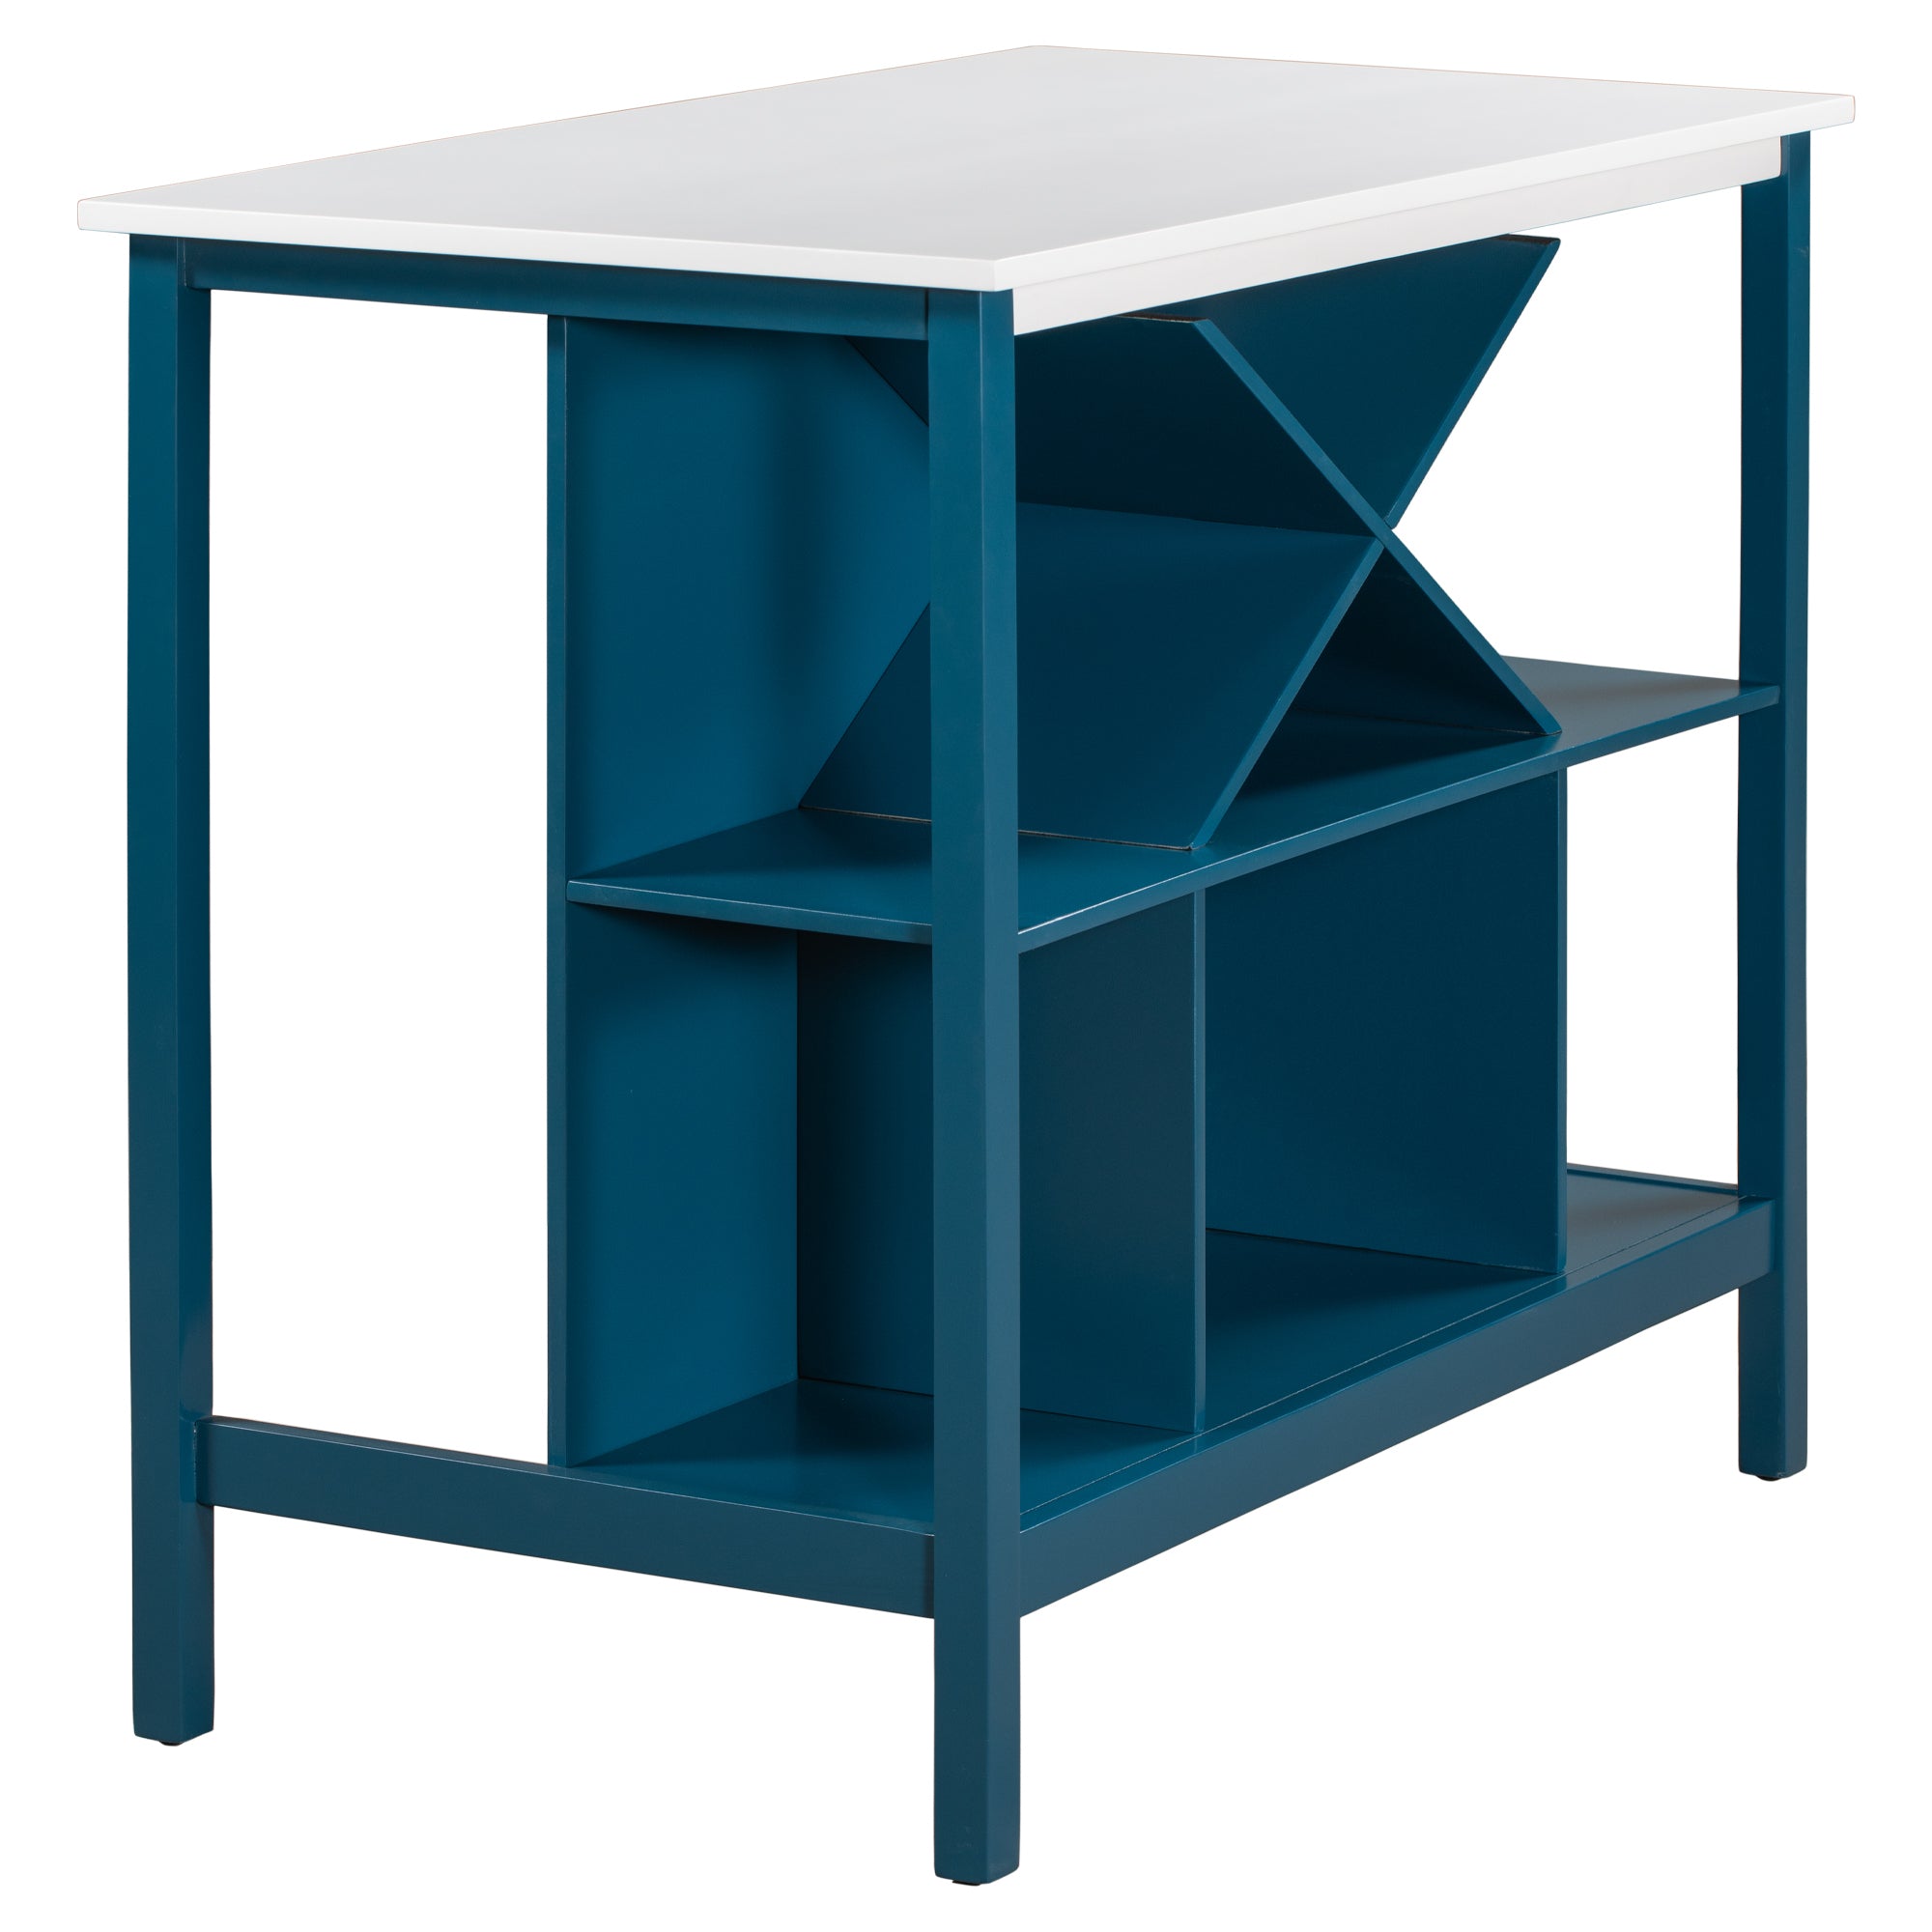 TOPMAX Wooden Dining Table (Blue Frame + White Countertop)